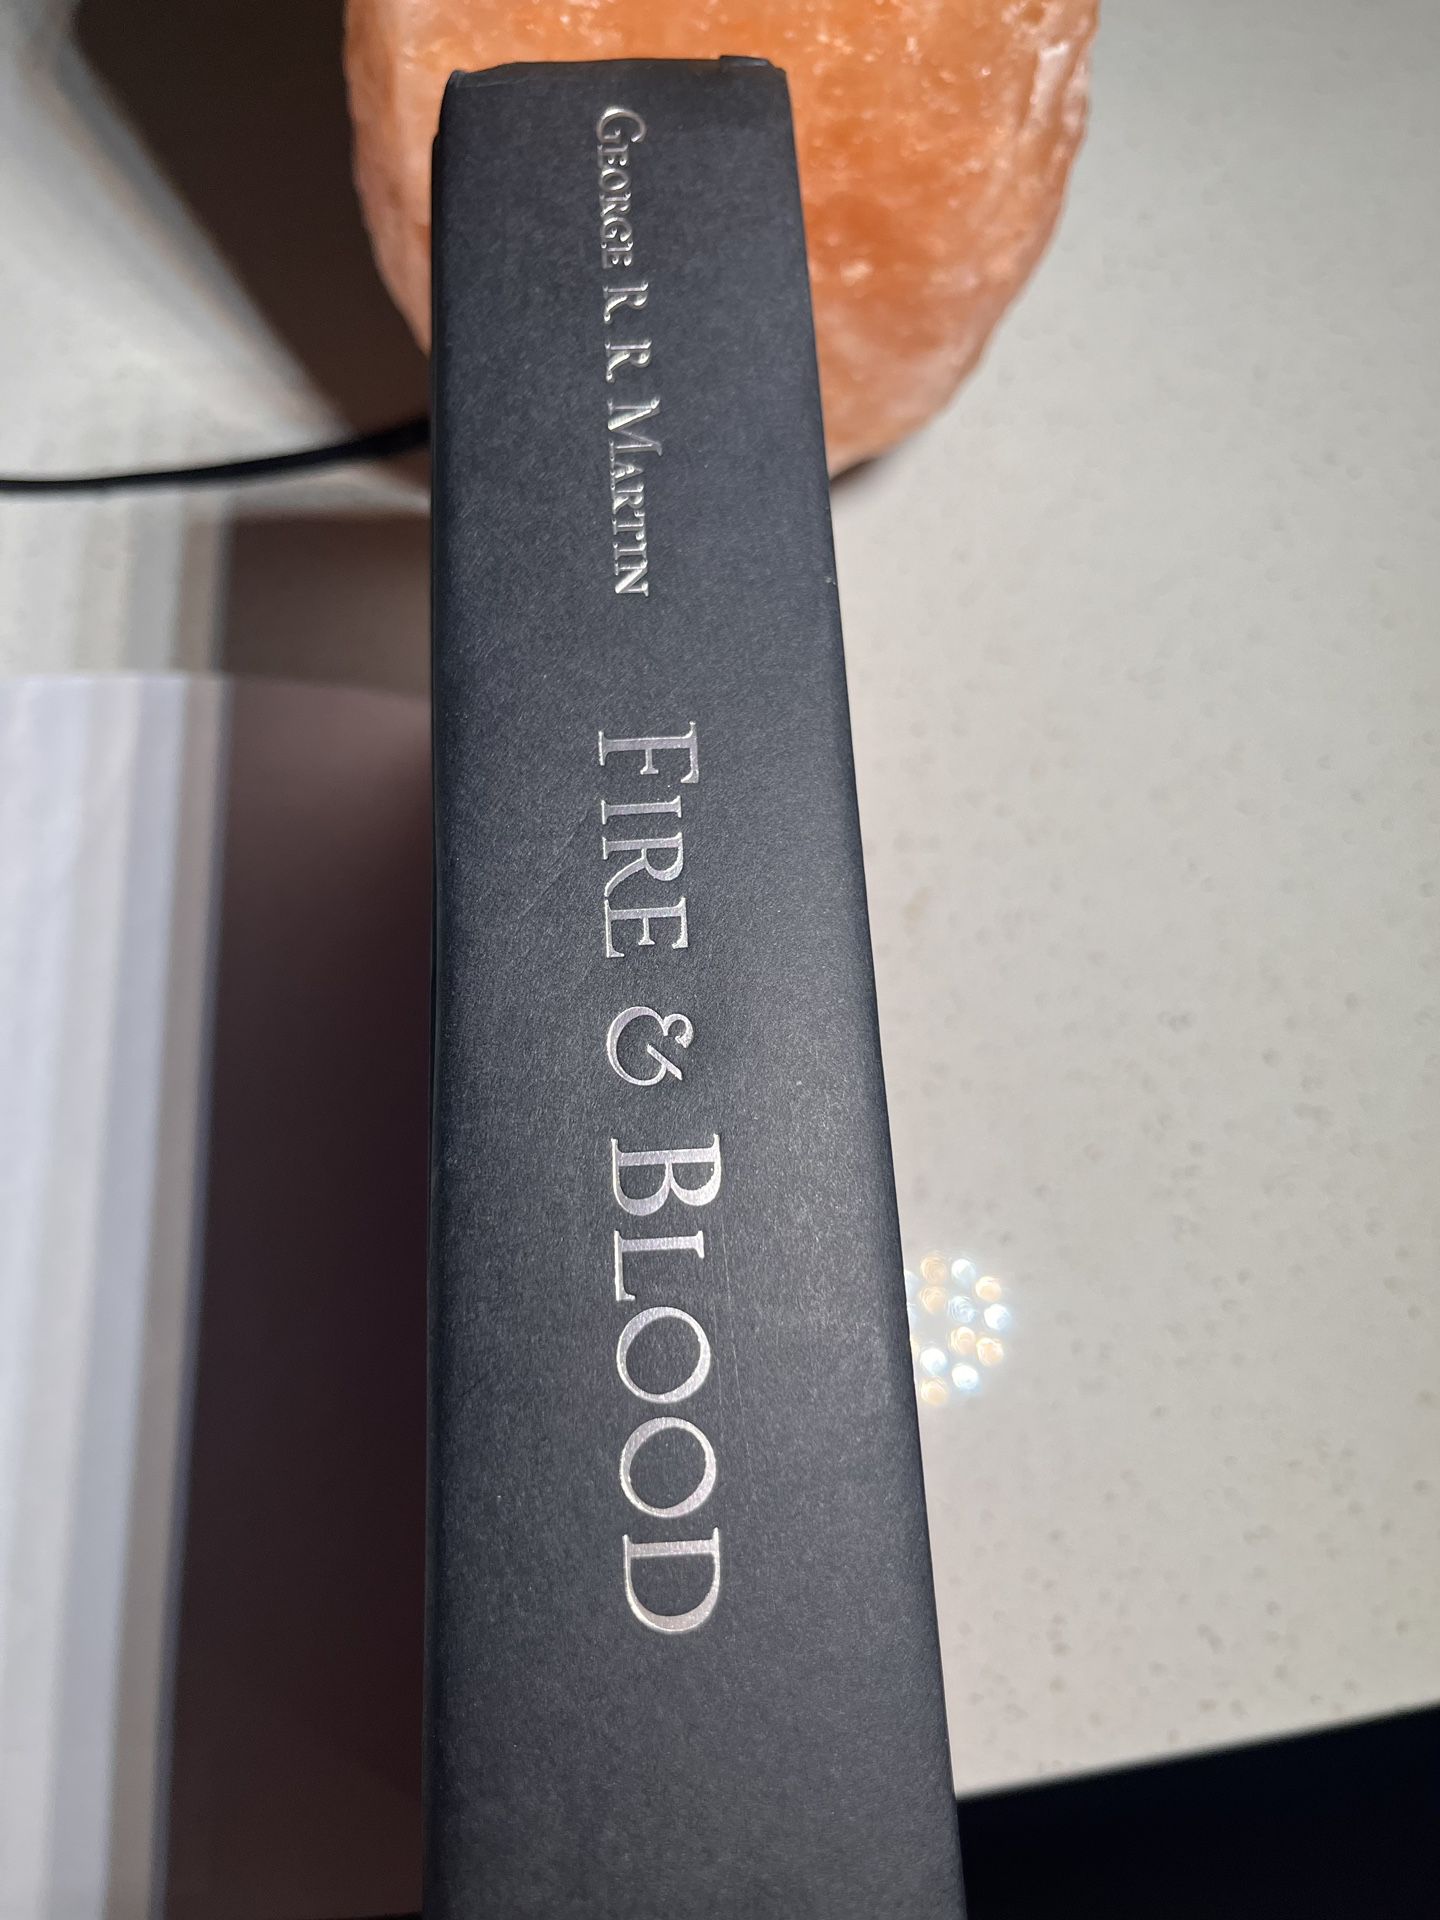 Fire and Blood By George R.R. Martin